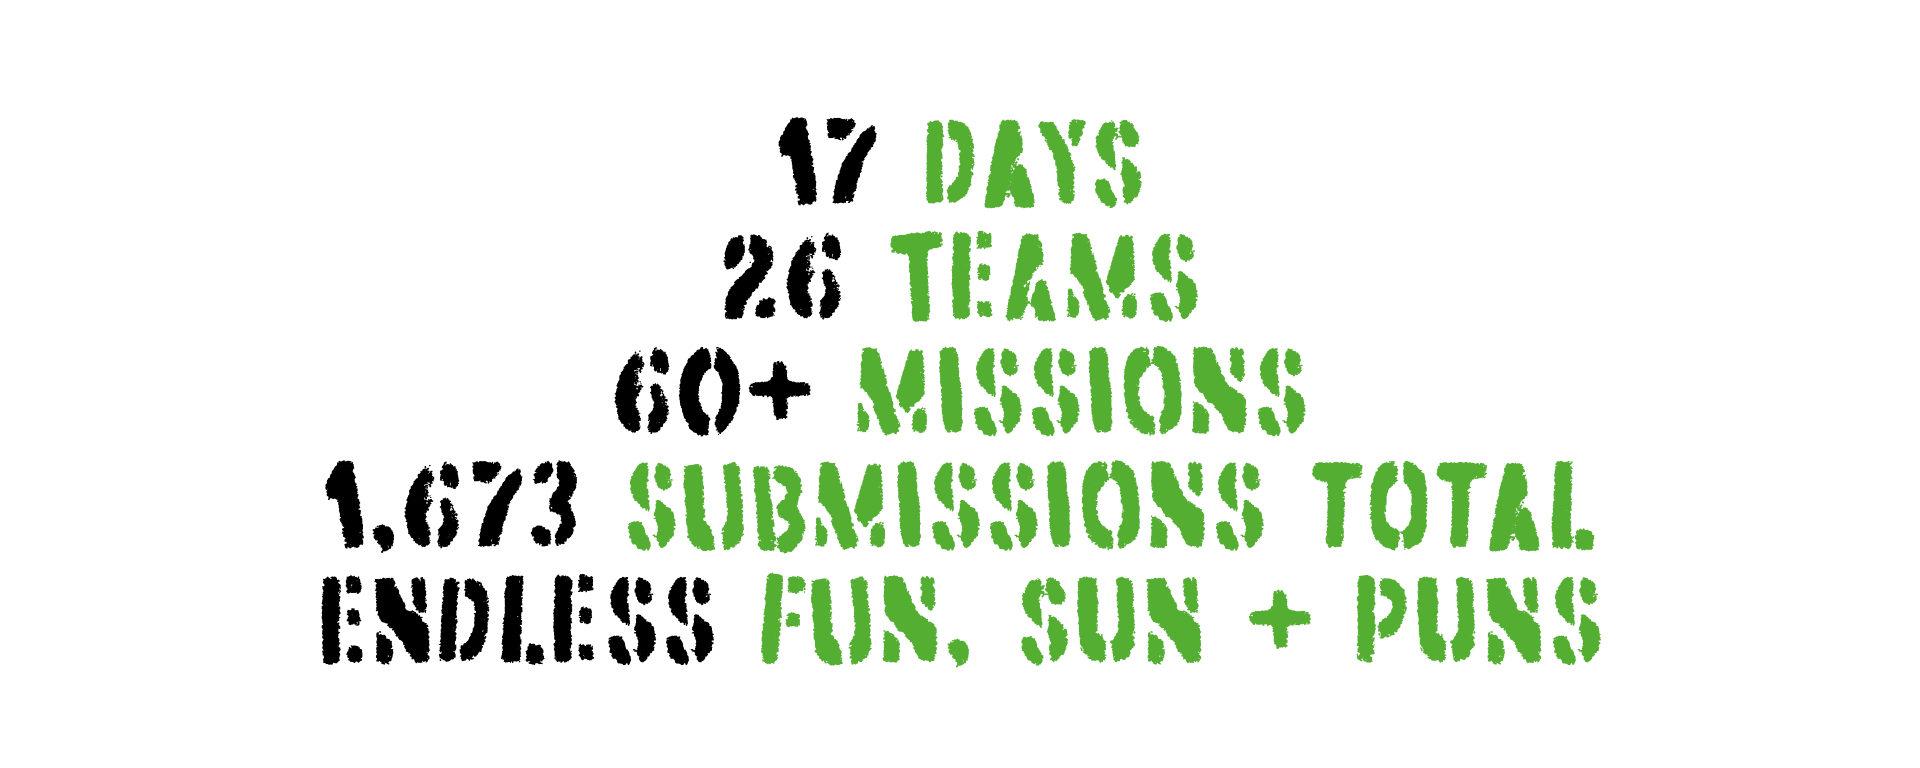 17 days - 1673 submissions